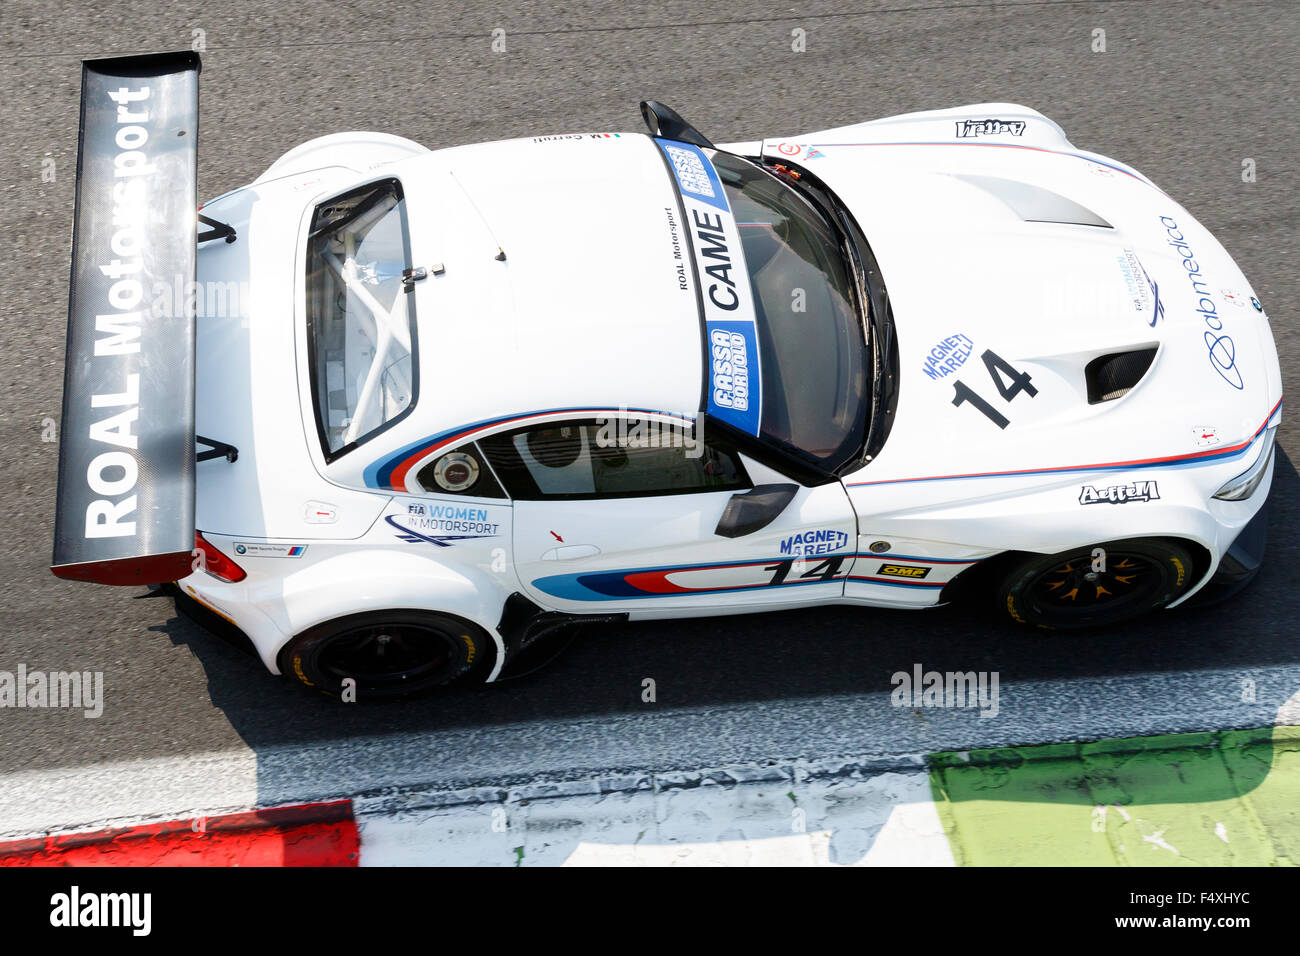 Monza, Italy - May 30, 2015: Bmw Z4 of Roal Motorsport team, driven  by Cerruti Michela) during the C.I. Granturismo - Race Stock Photo